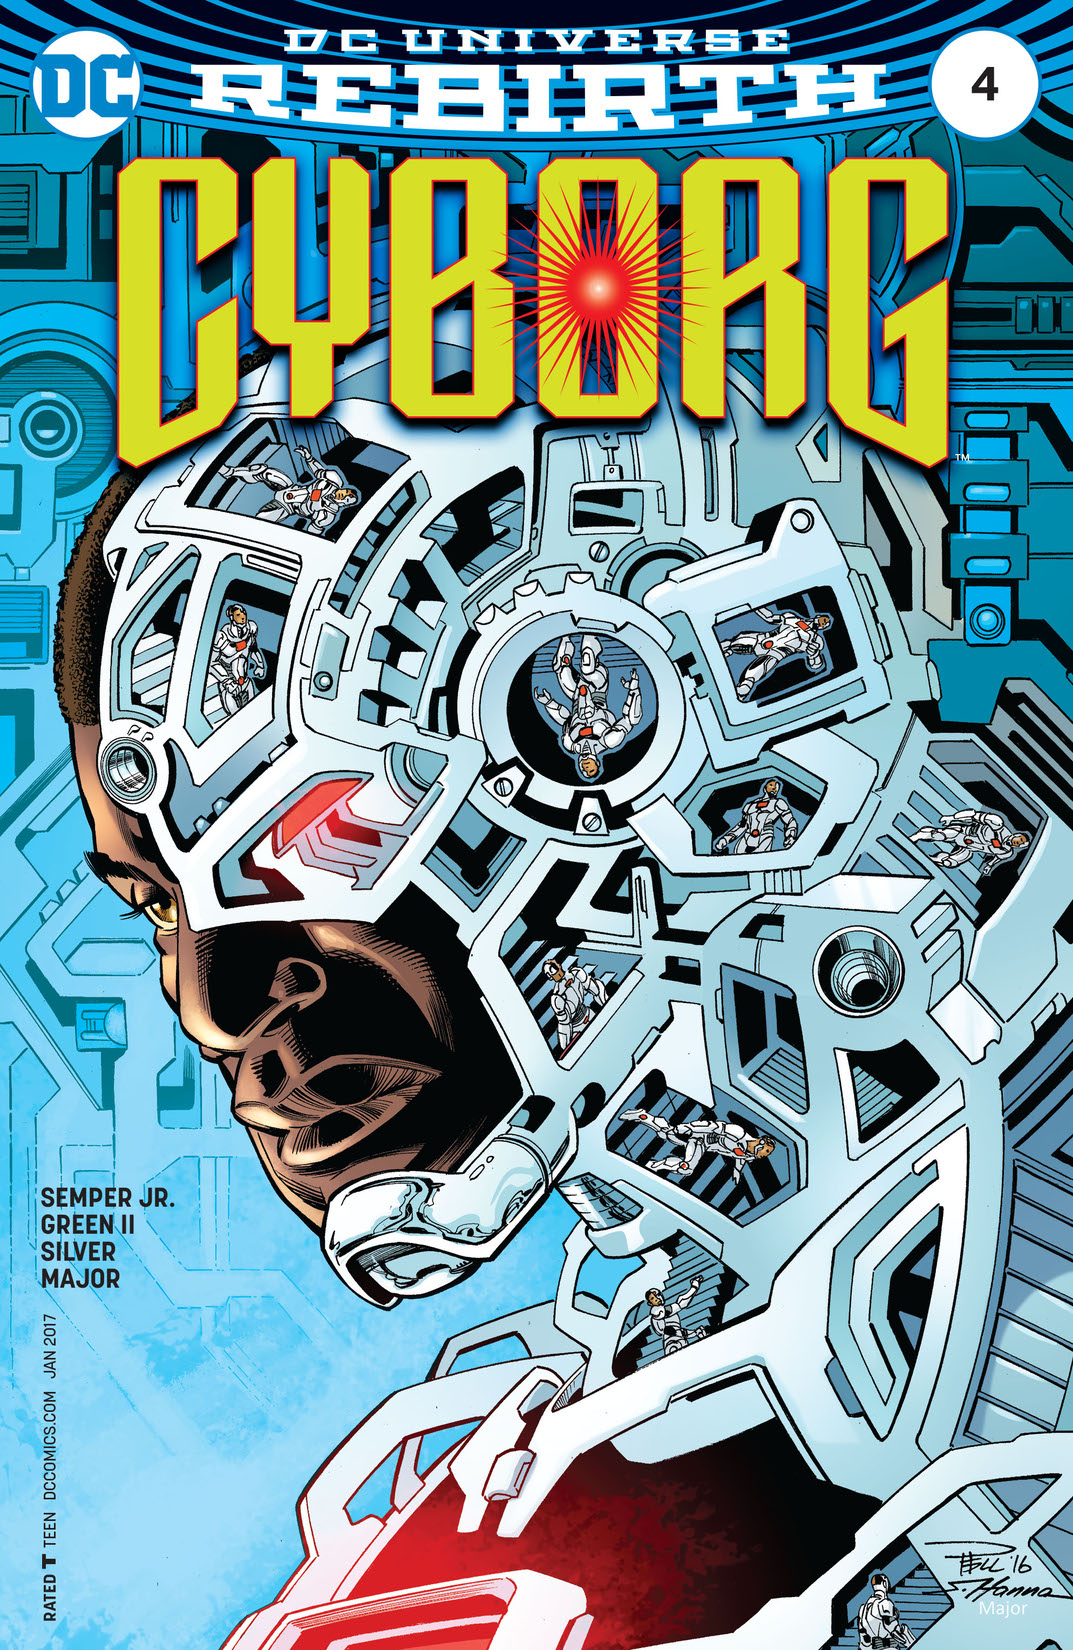 Cyborg (2016-) #4 preview images